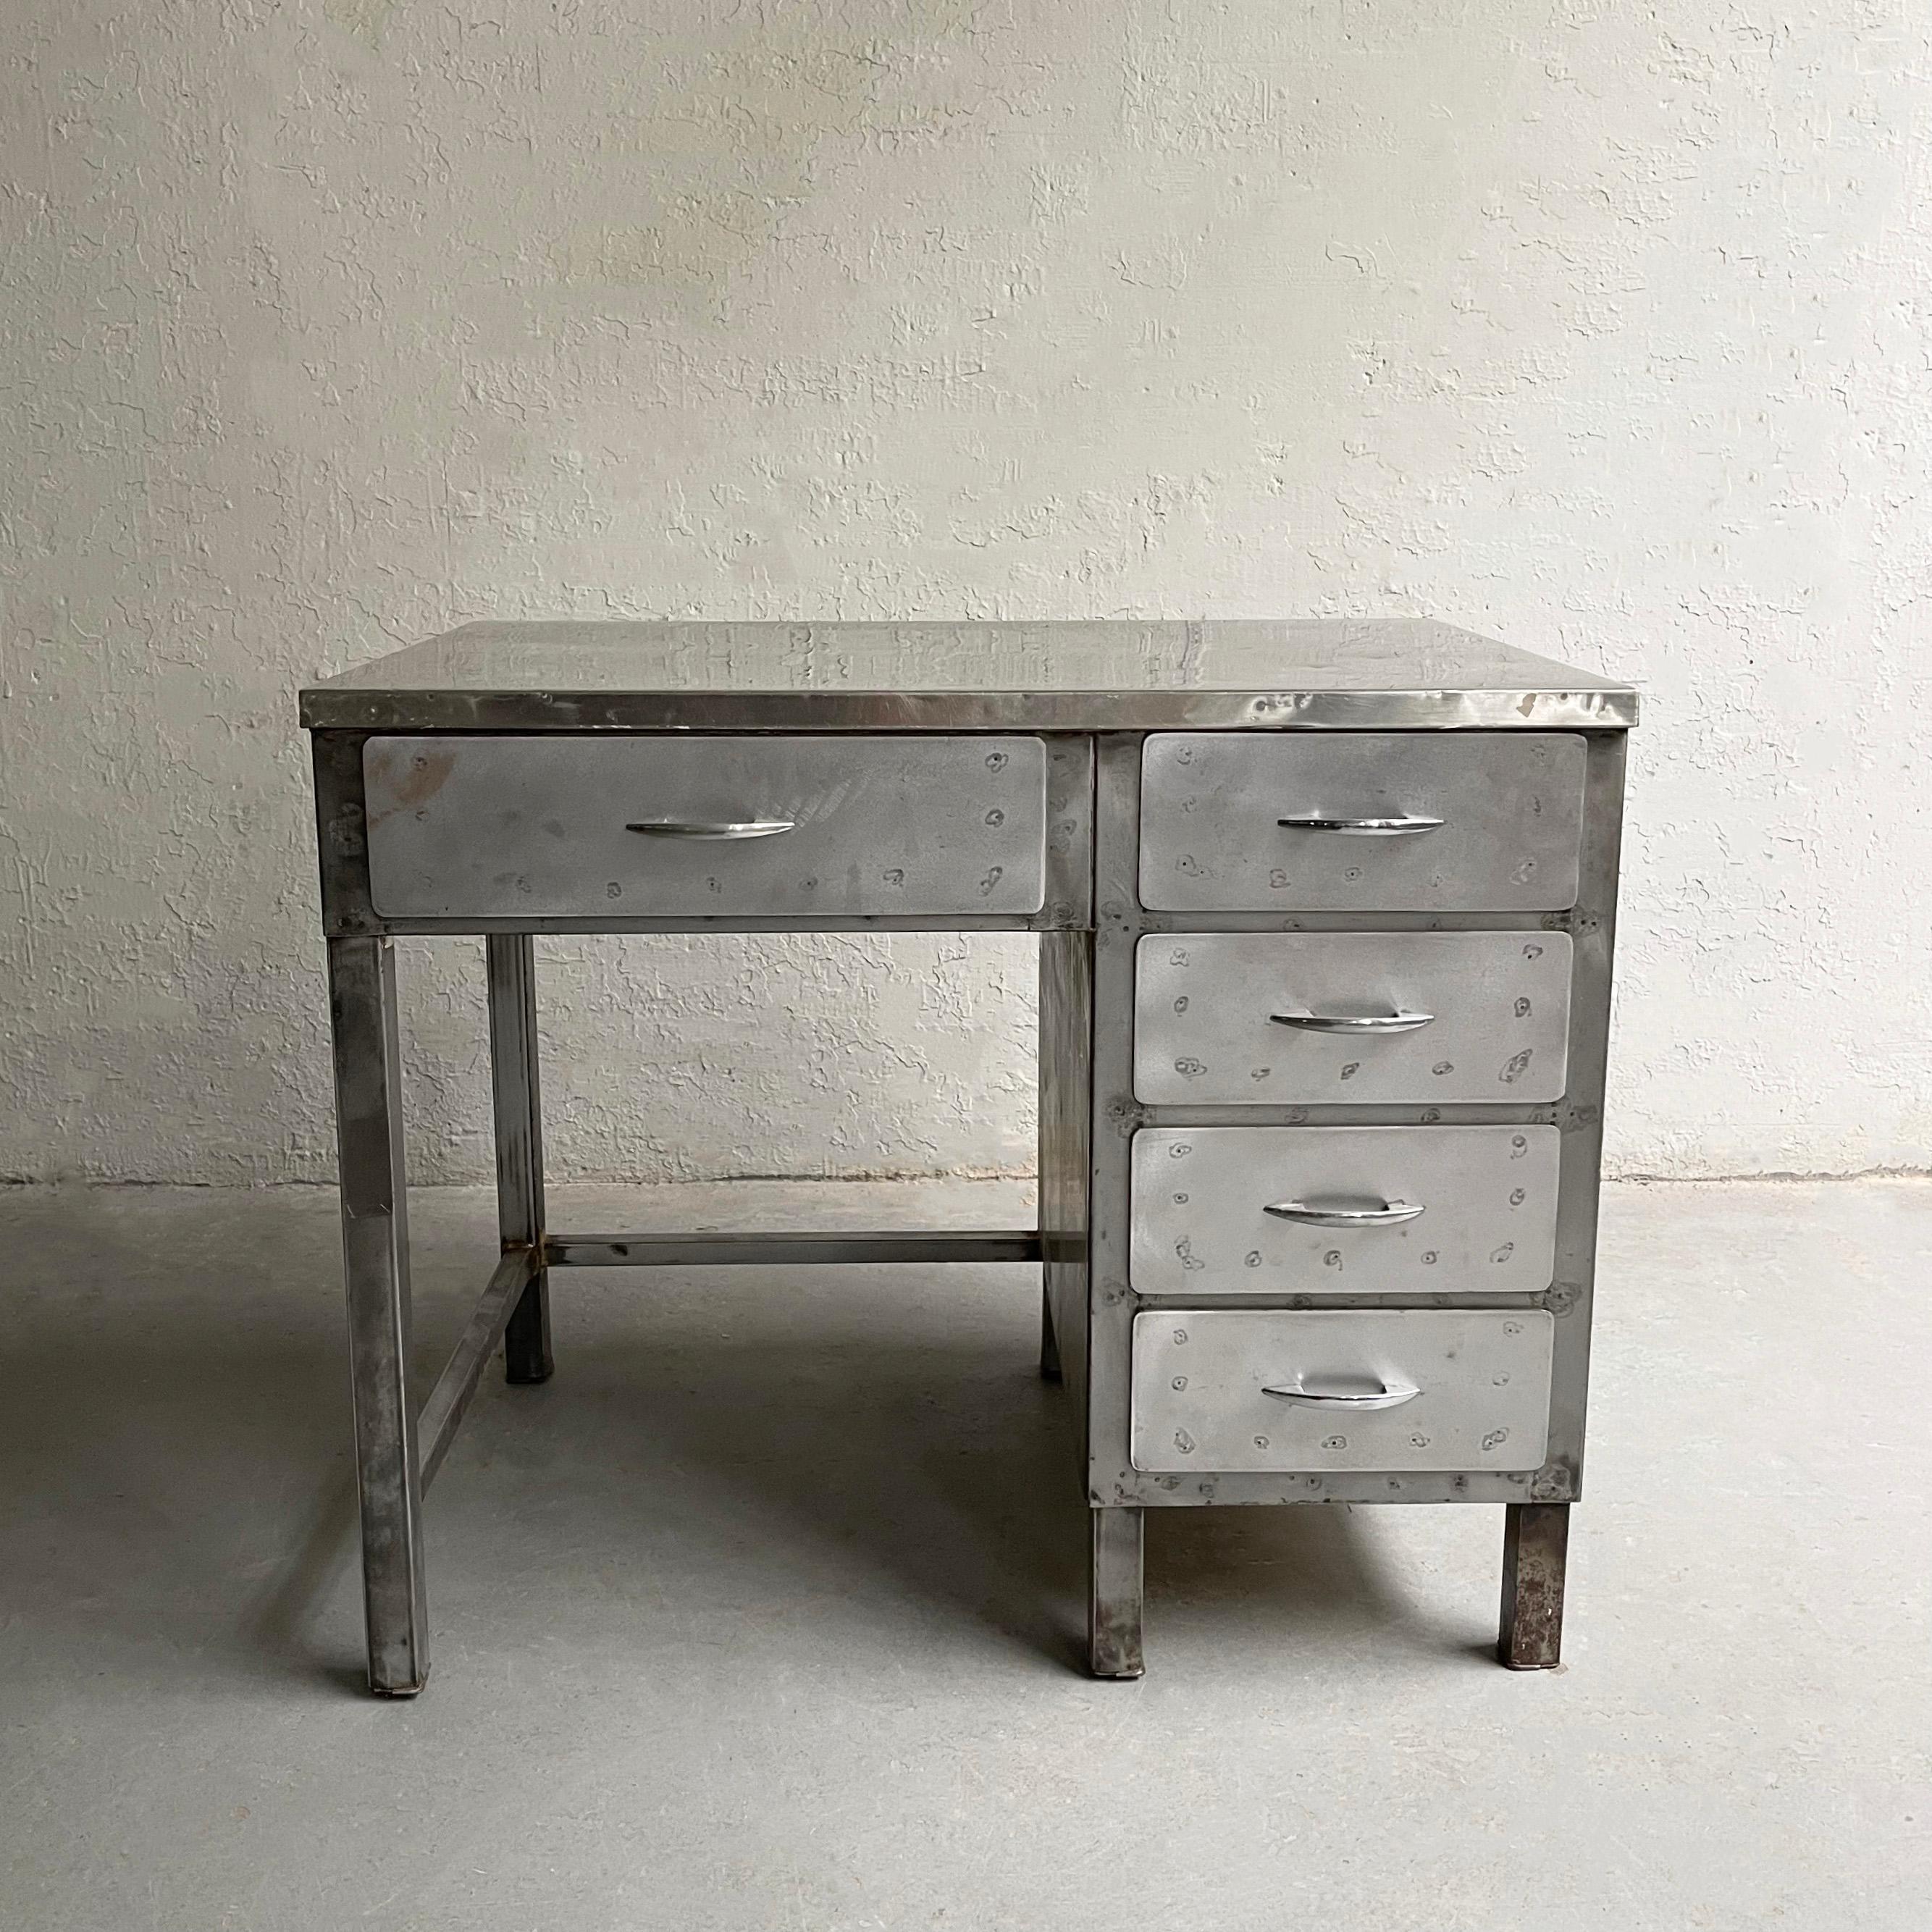 Midcentury, industrial, factory desk features a brushed steel body with stainless steel top and handles and is presentable on the back as well. The desk's chair opening is 19.5 x 23 inches.